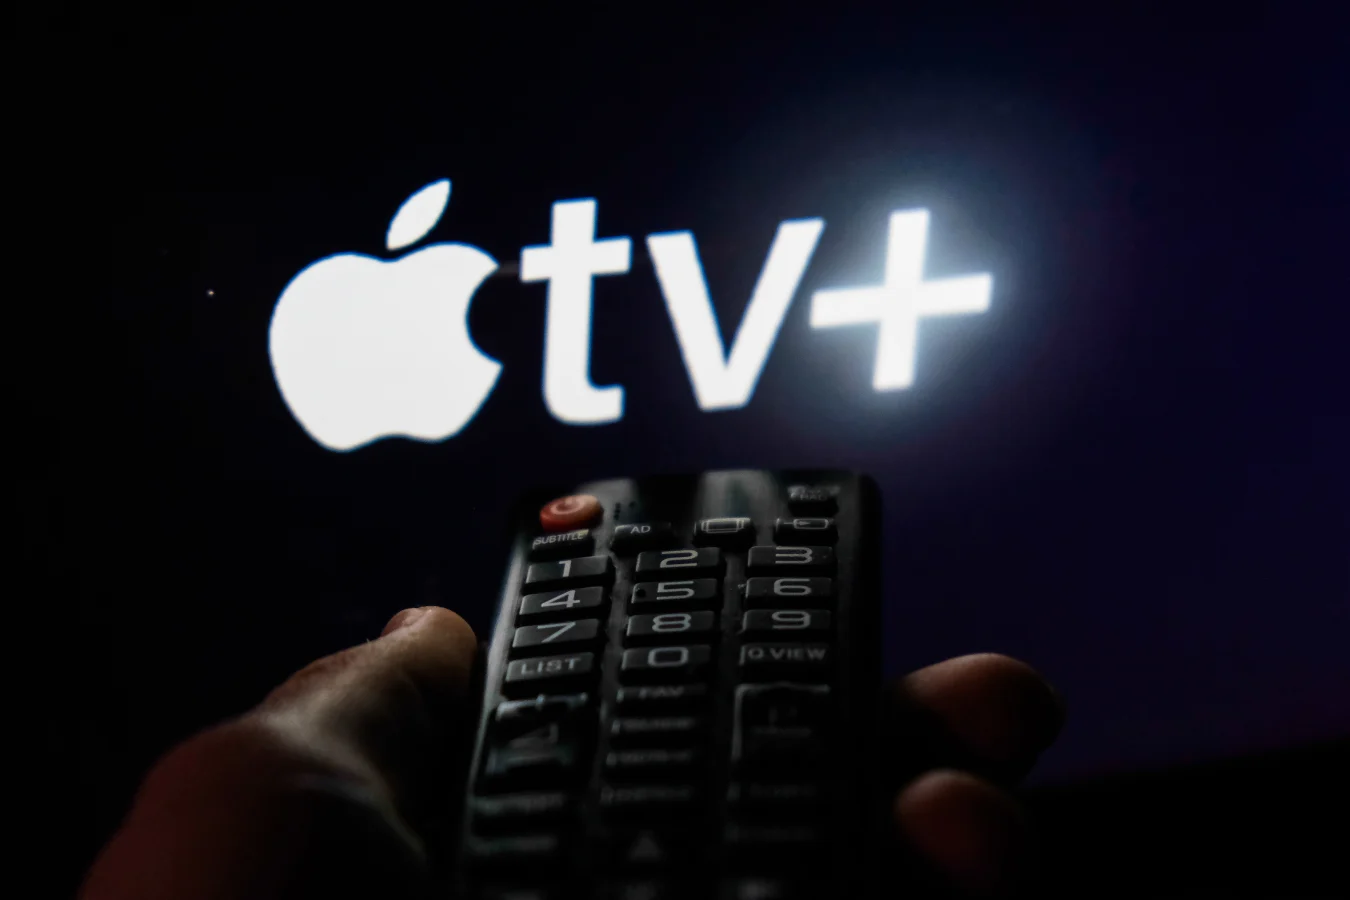 TV remote control is seen with Apple TV+ logo displayed on a screen in this illustration photo taken in Krakow, Poland on February 6, 2022. (Photo by Jakub Porzycki/NurPhoto via Getty Images)